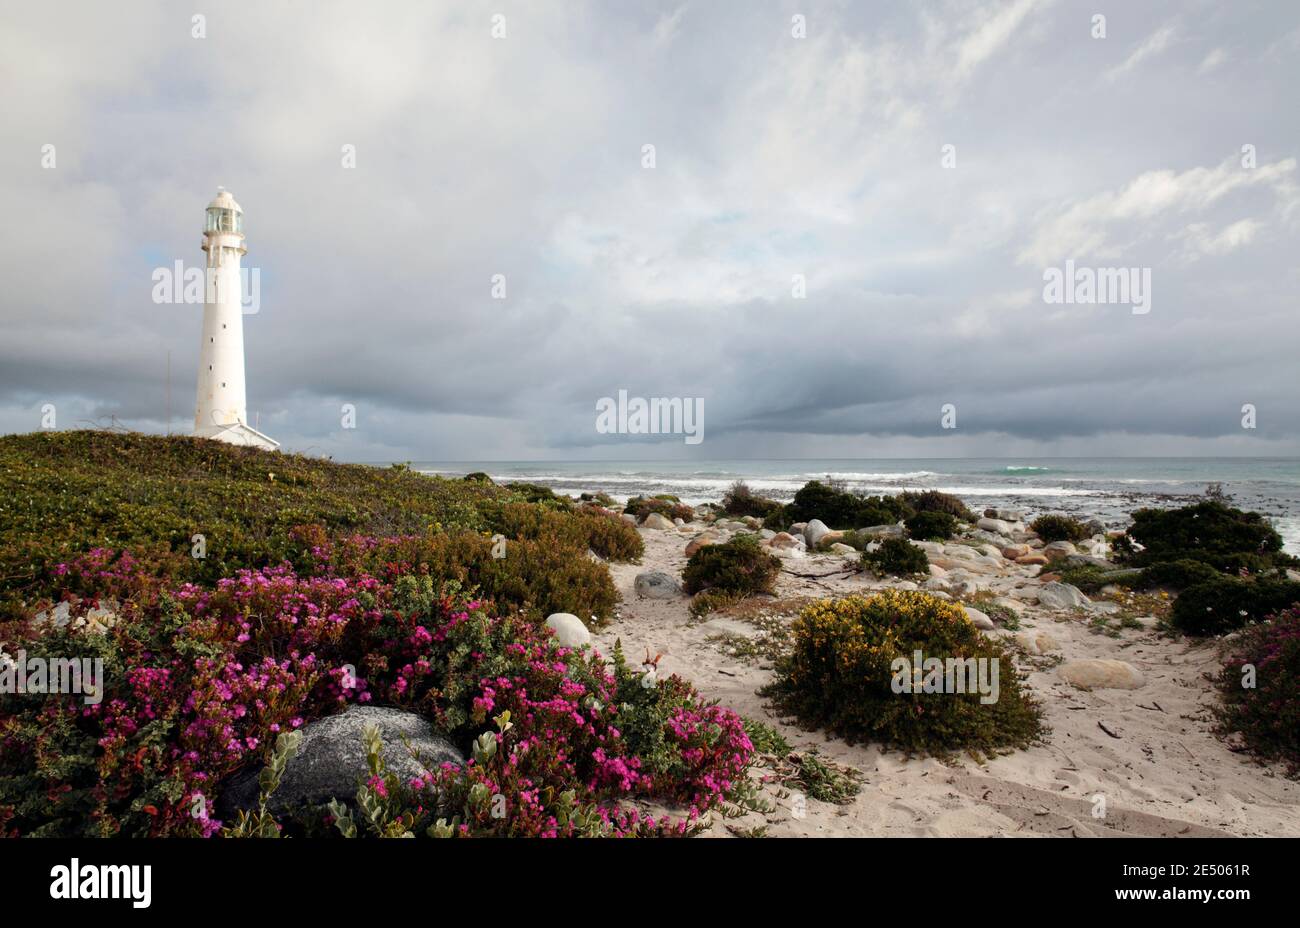 Slangkop Lighthouse, Kommetjie, nr Cape Town, Western Cape, South Africa – built in 1919 the lighthouse is 33 metres high and is made of cast iron. Stock Photo